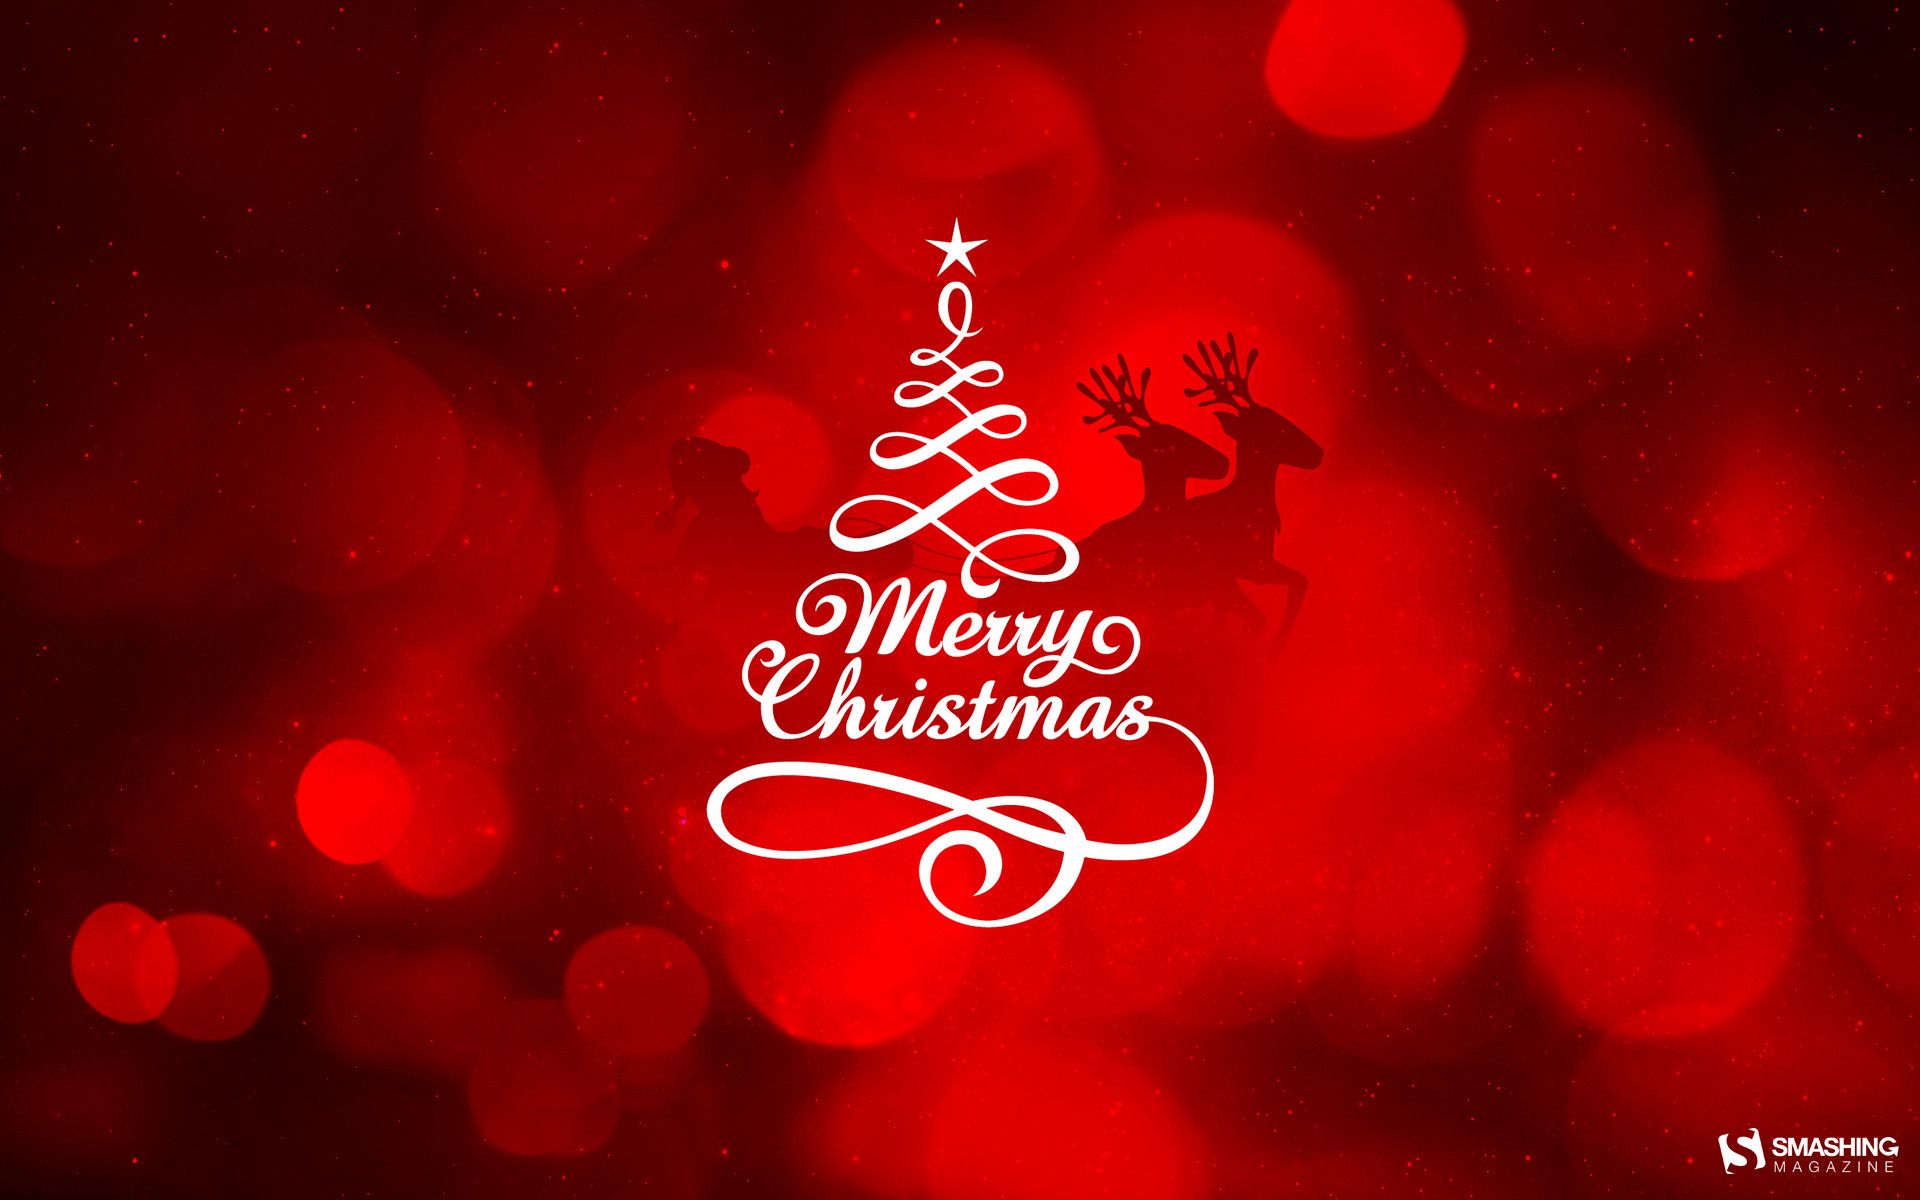 Free Christmas Wallpaper Download in HD